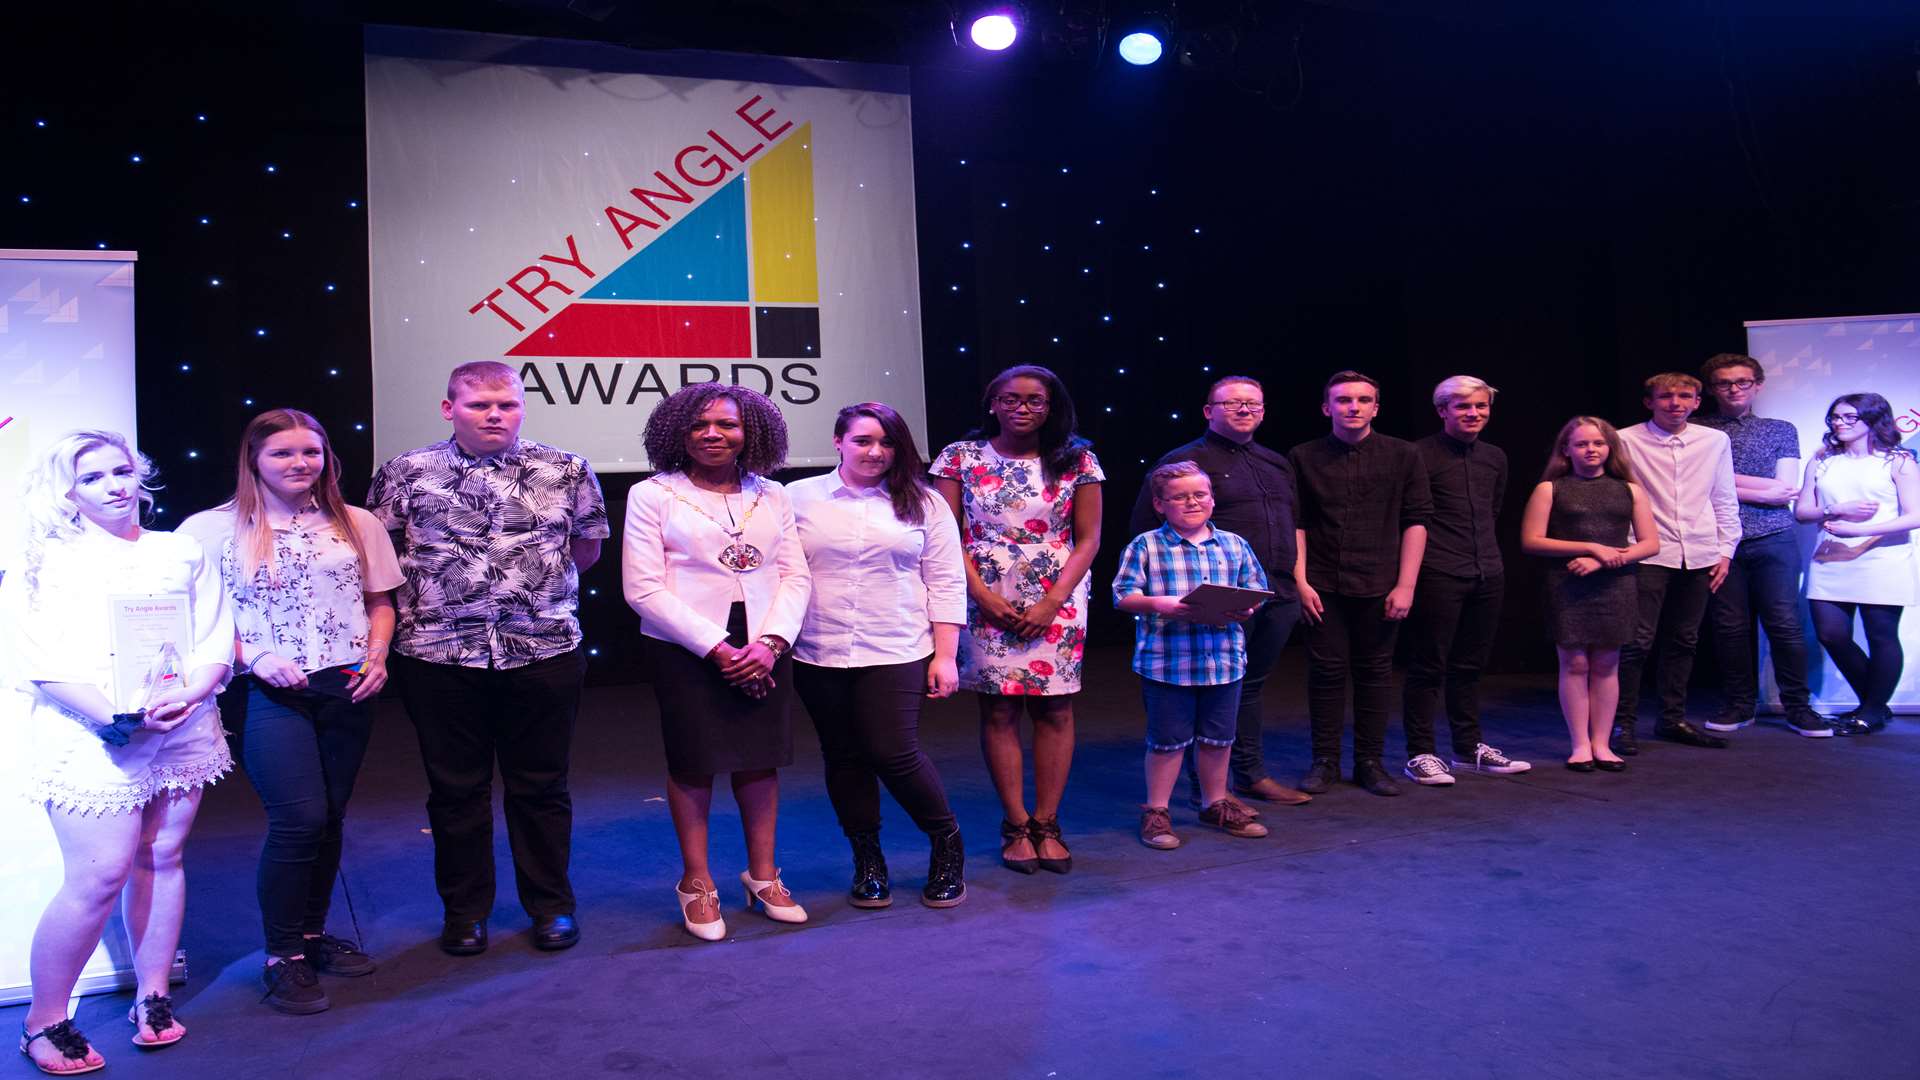 The winners of the Medway Try Angle Awards 2016 with Deputy Mayor Gloria Opara